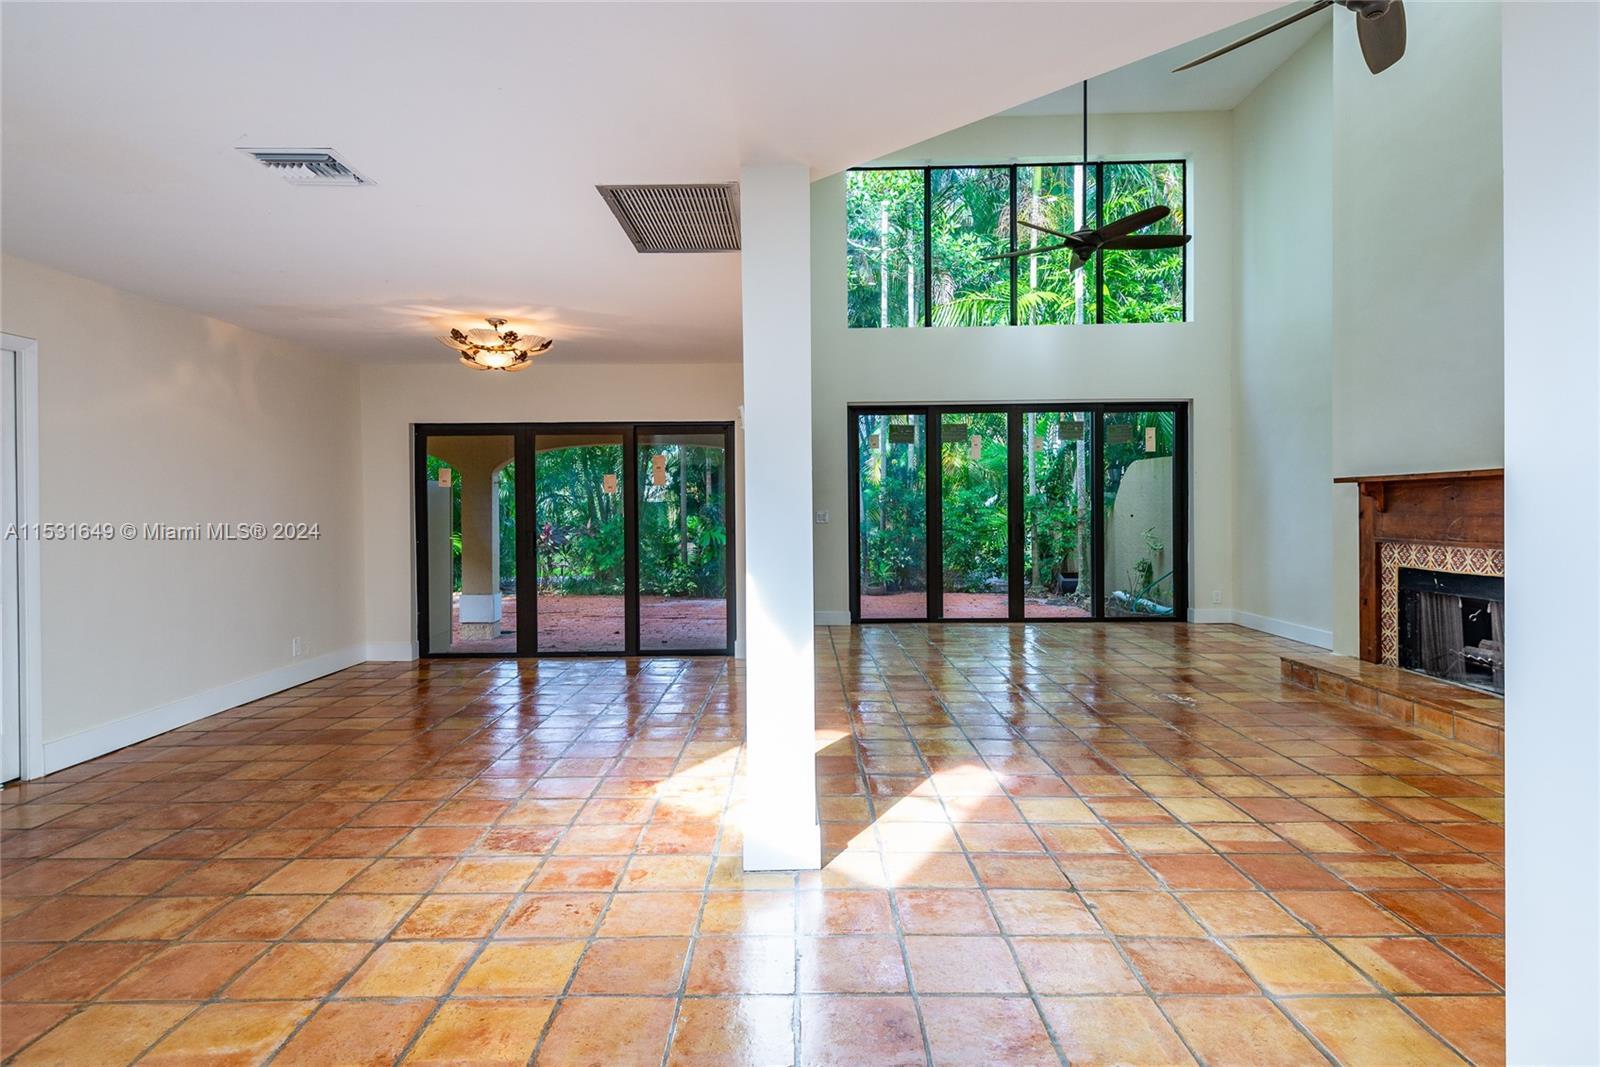 Spacious & bright home in prestigious Boca Pointe. Sun-filled private home has vaulted ceilings & sk